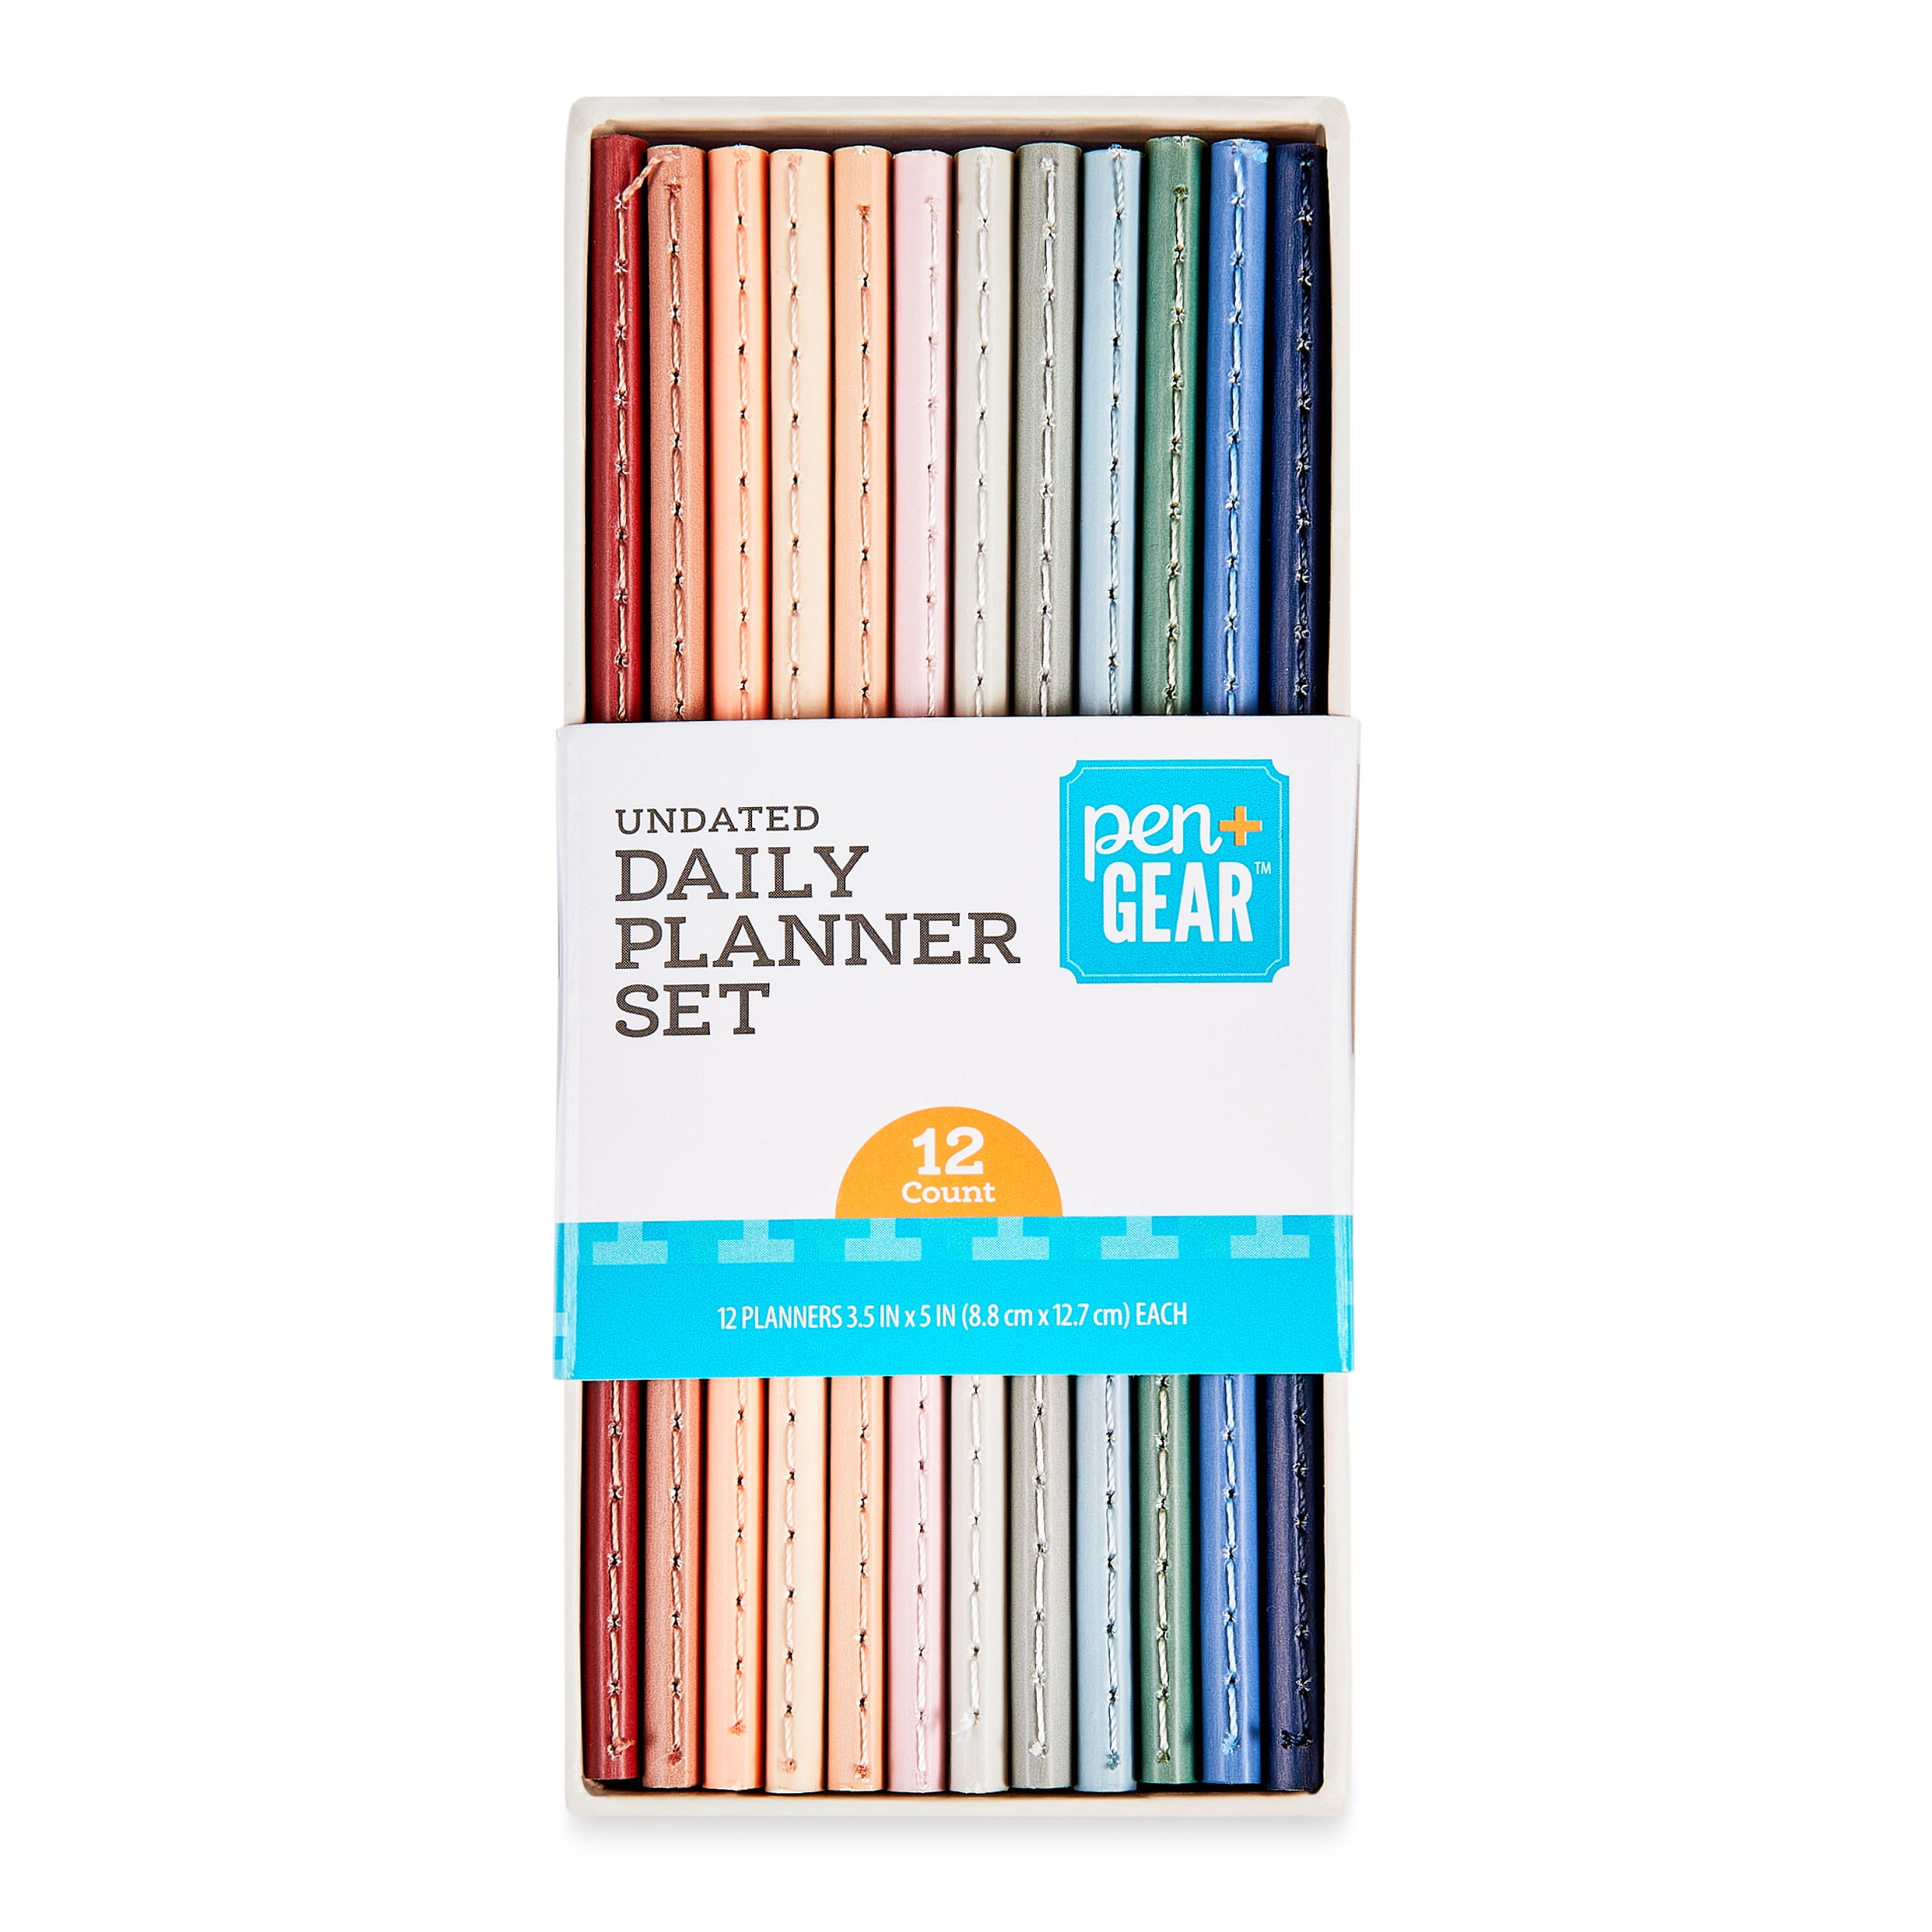 Pen + Gear Undated Daily Planners, Multi-Color, 3.5 in x 5 in, 12 Count 